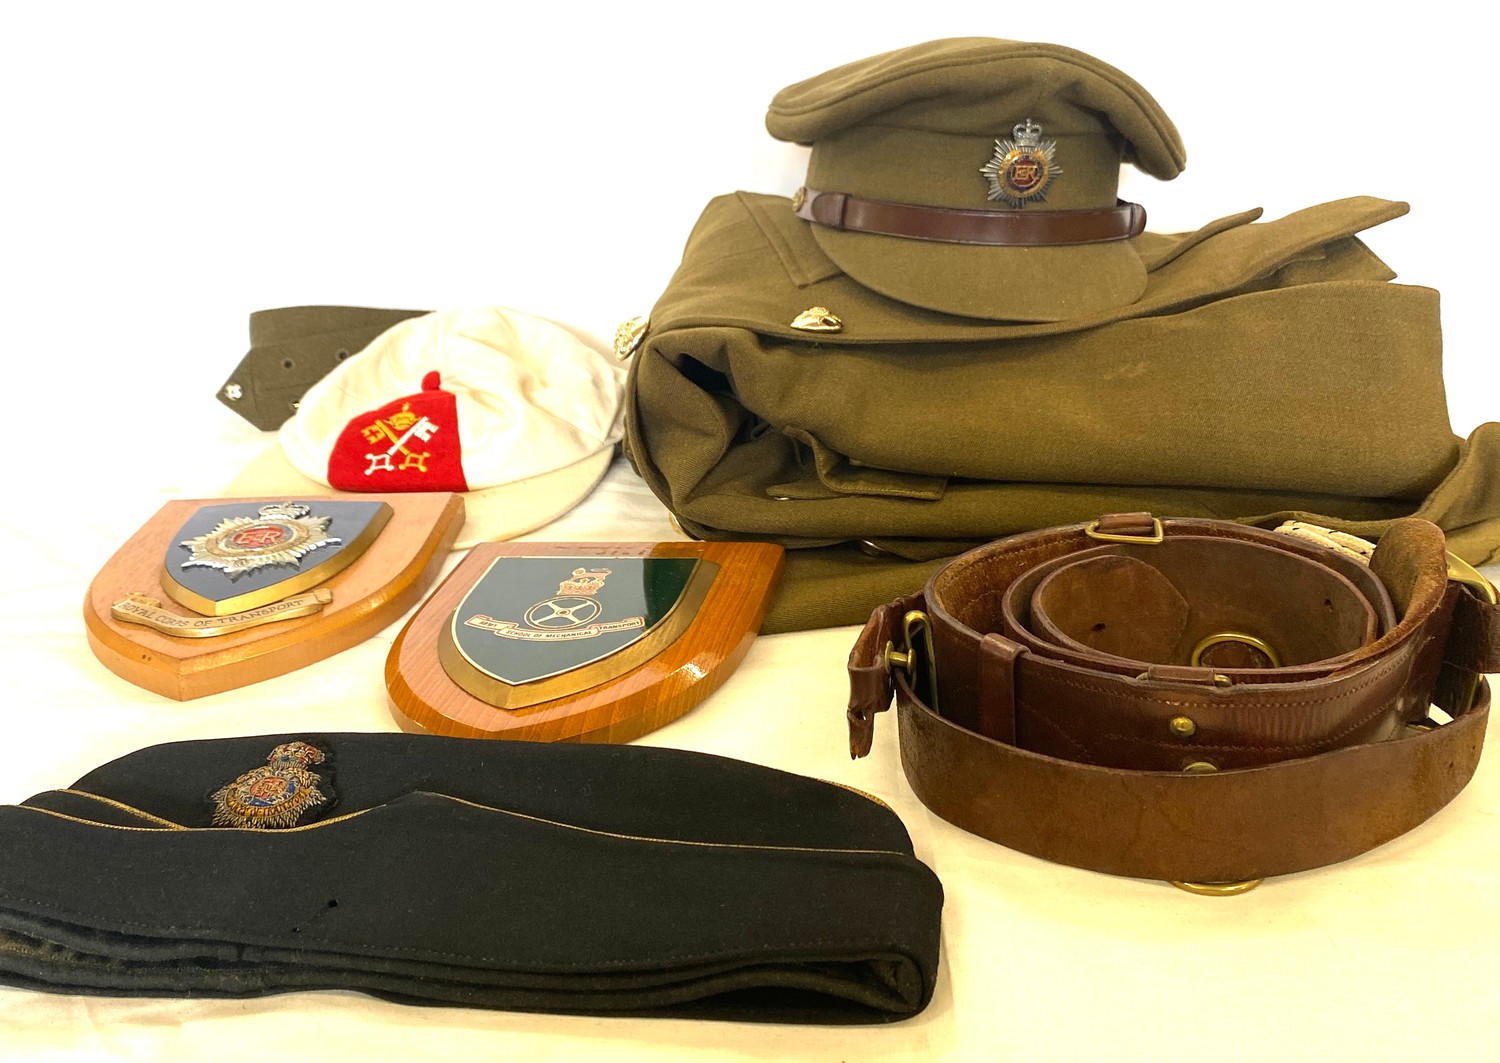 Army uniform with cap and sam brown belt